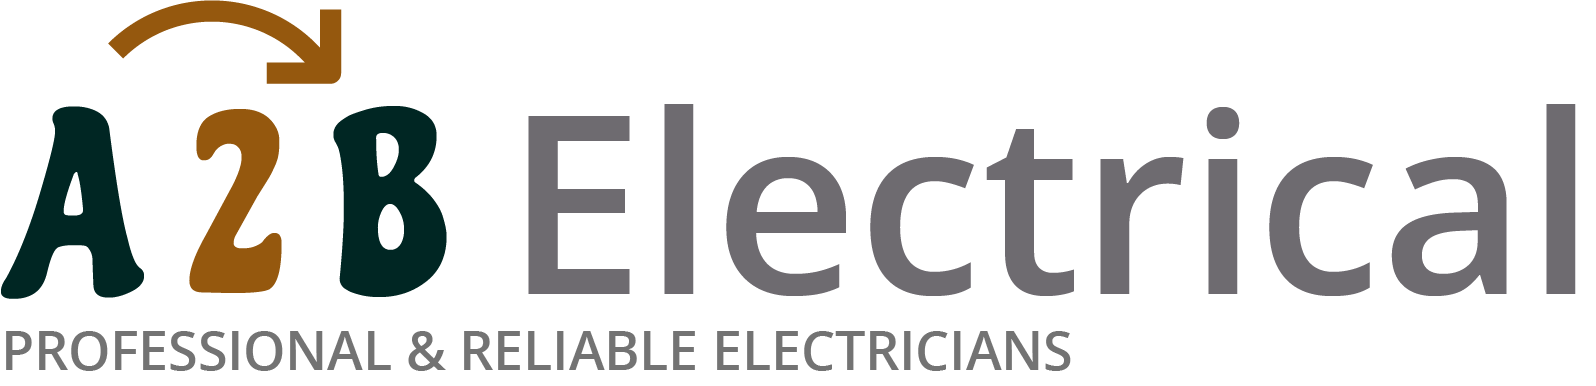 If you have electrical wiring problems in Ledbury, we can provide an electrician to have a look for you. 